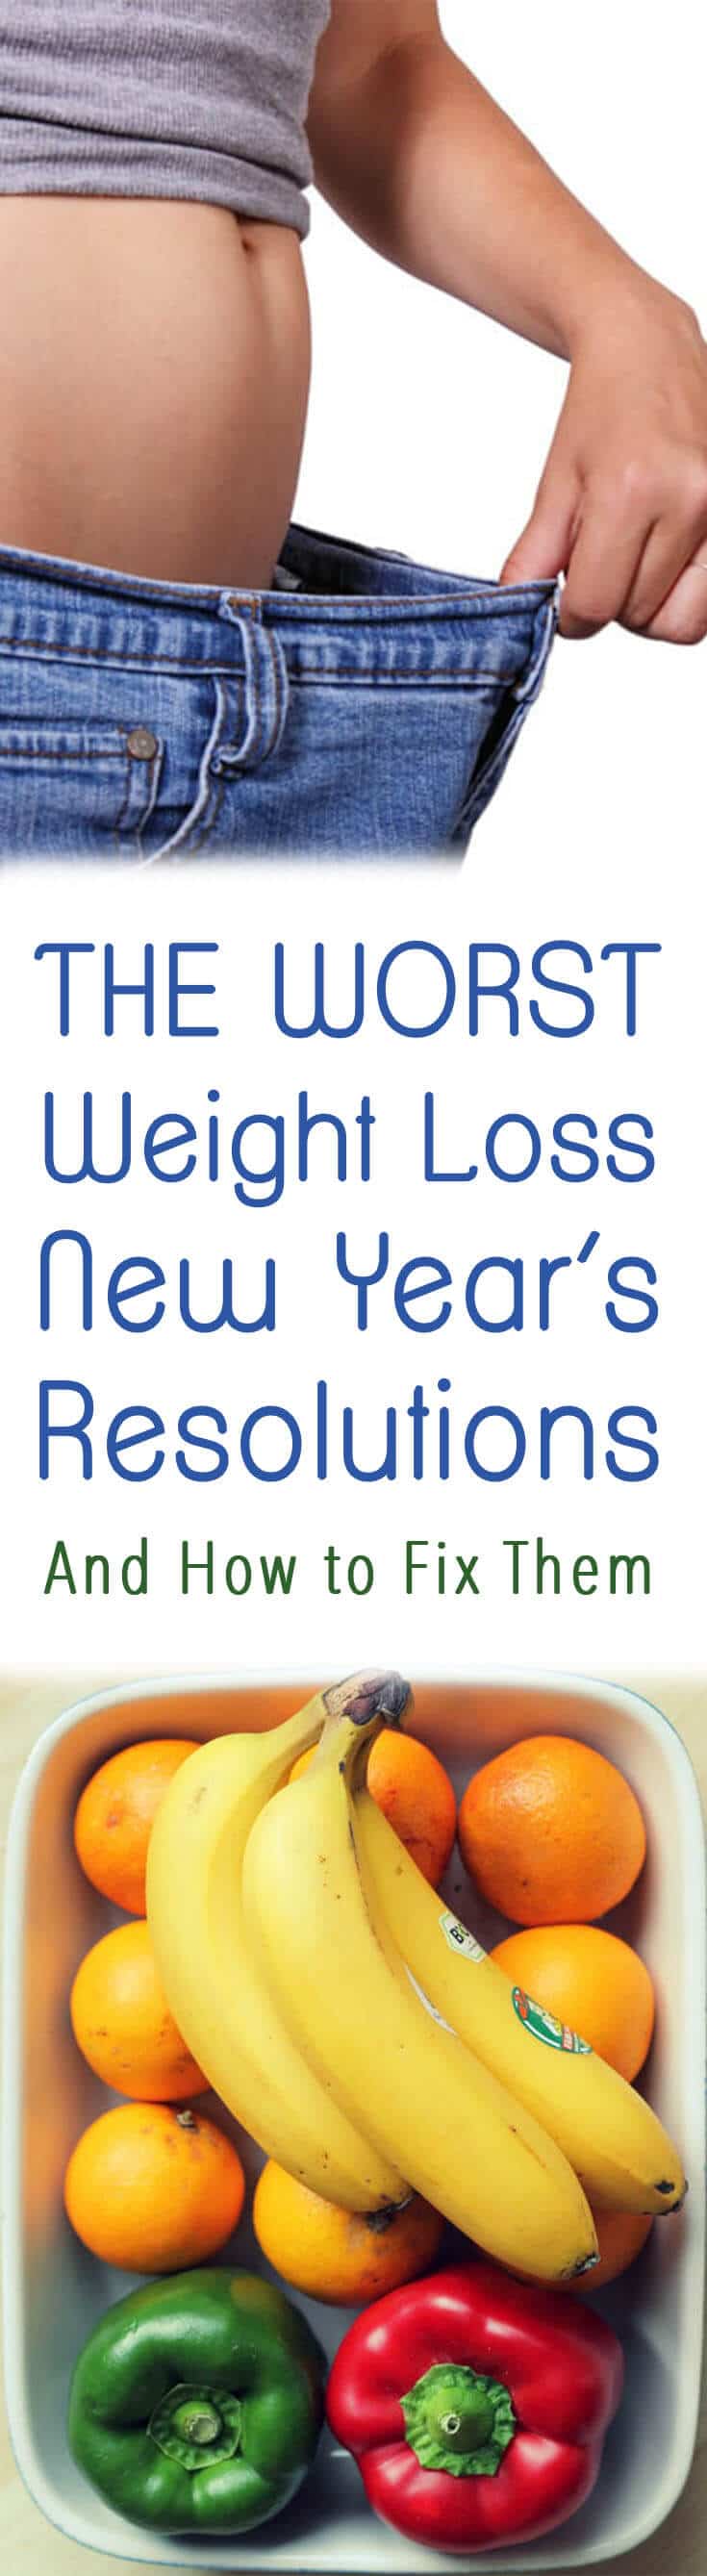 The Worst Weight Loss New Year’s Resolutions (and How to Fix Them ...